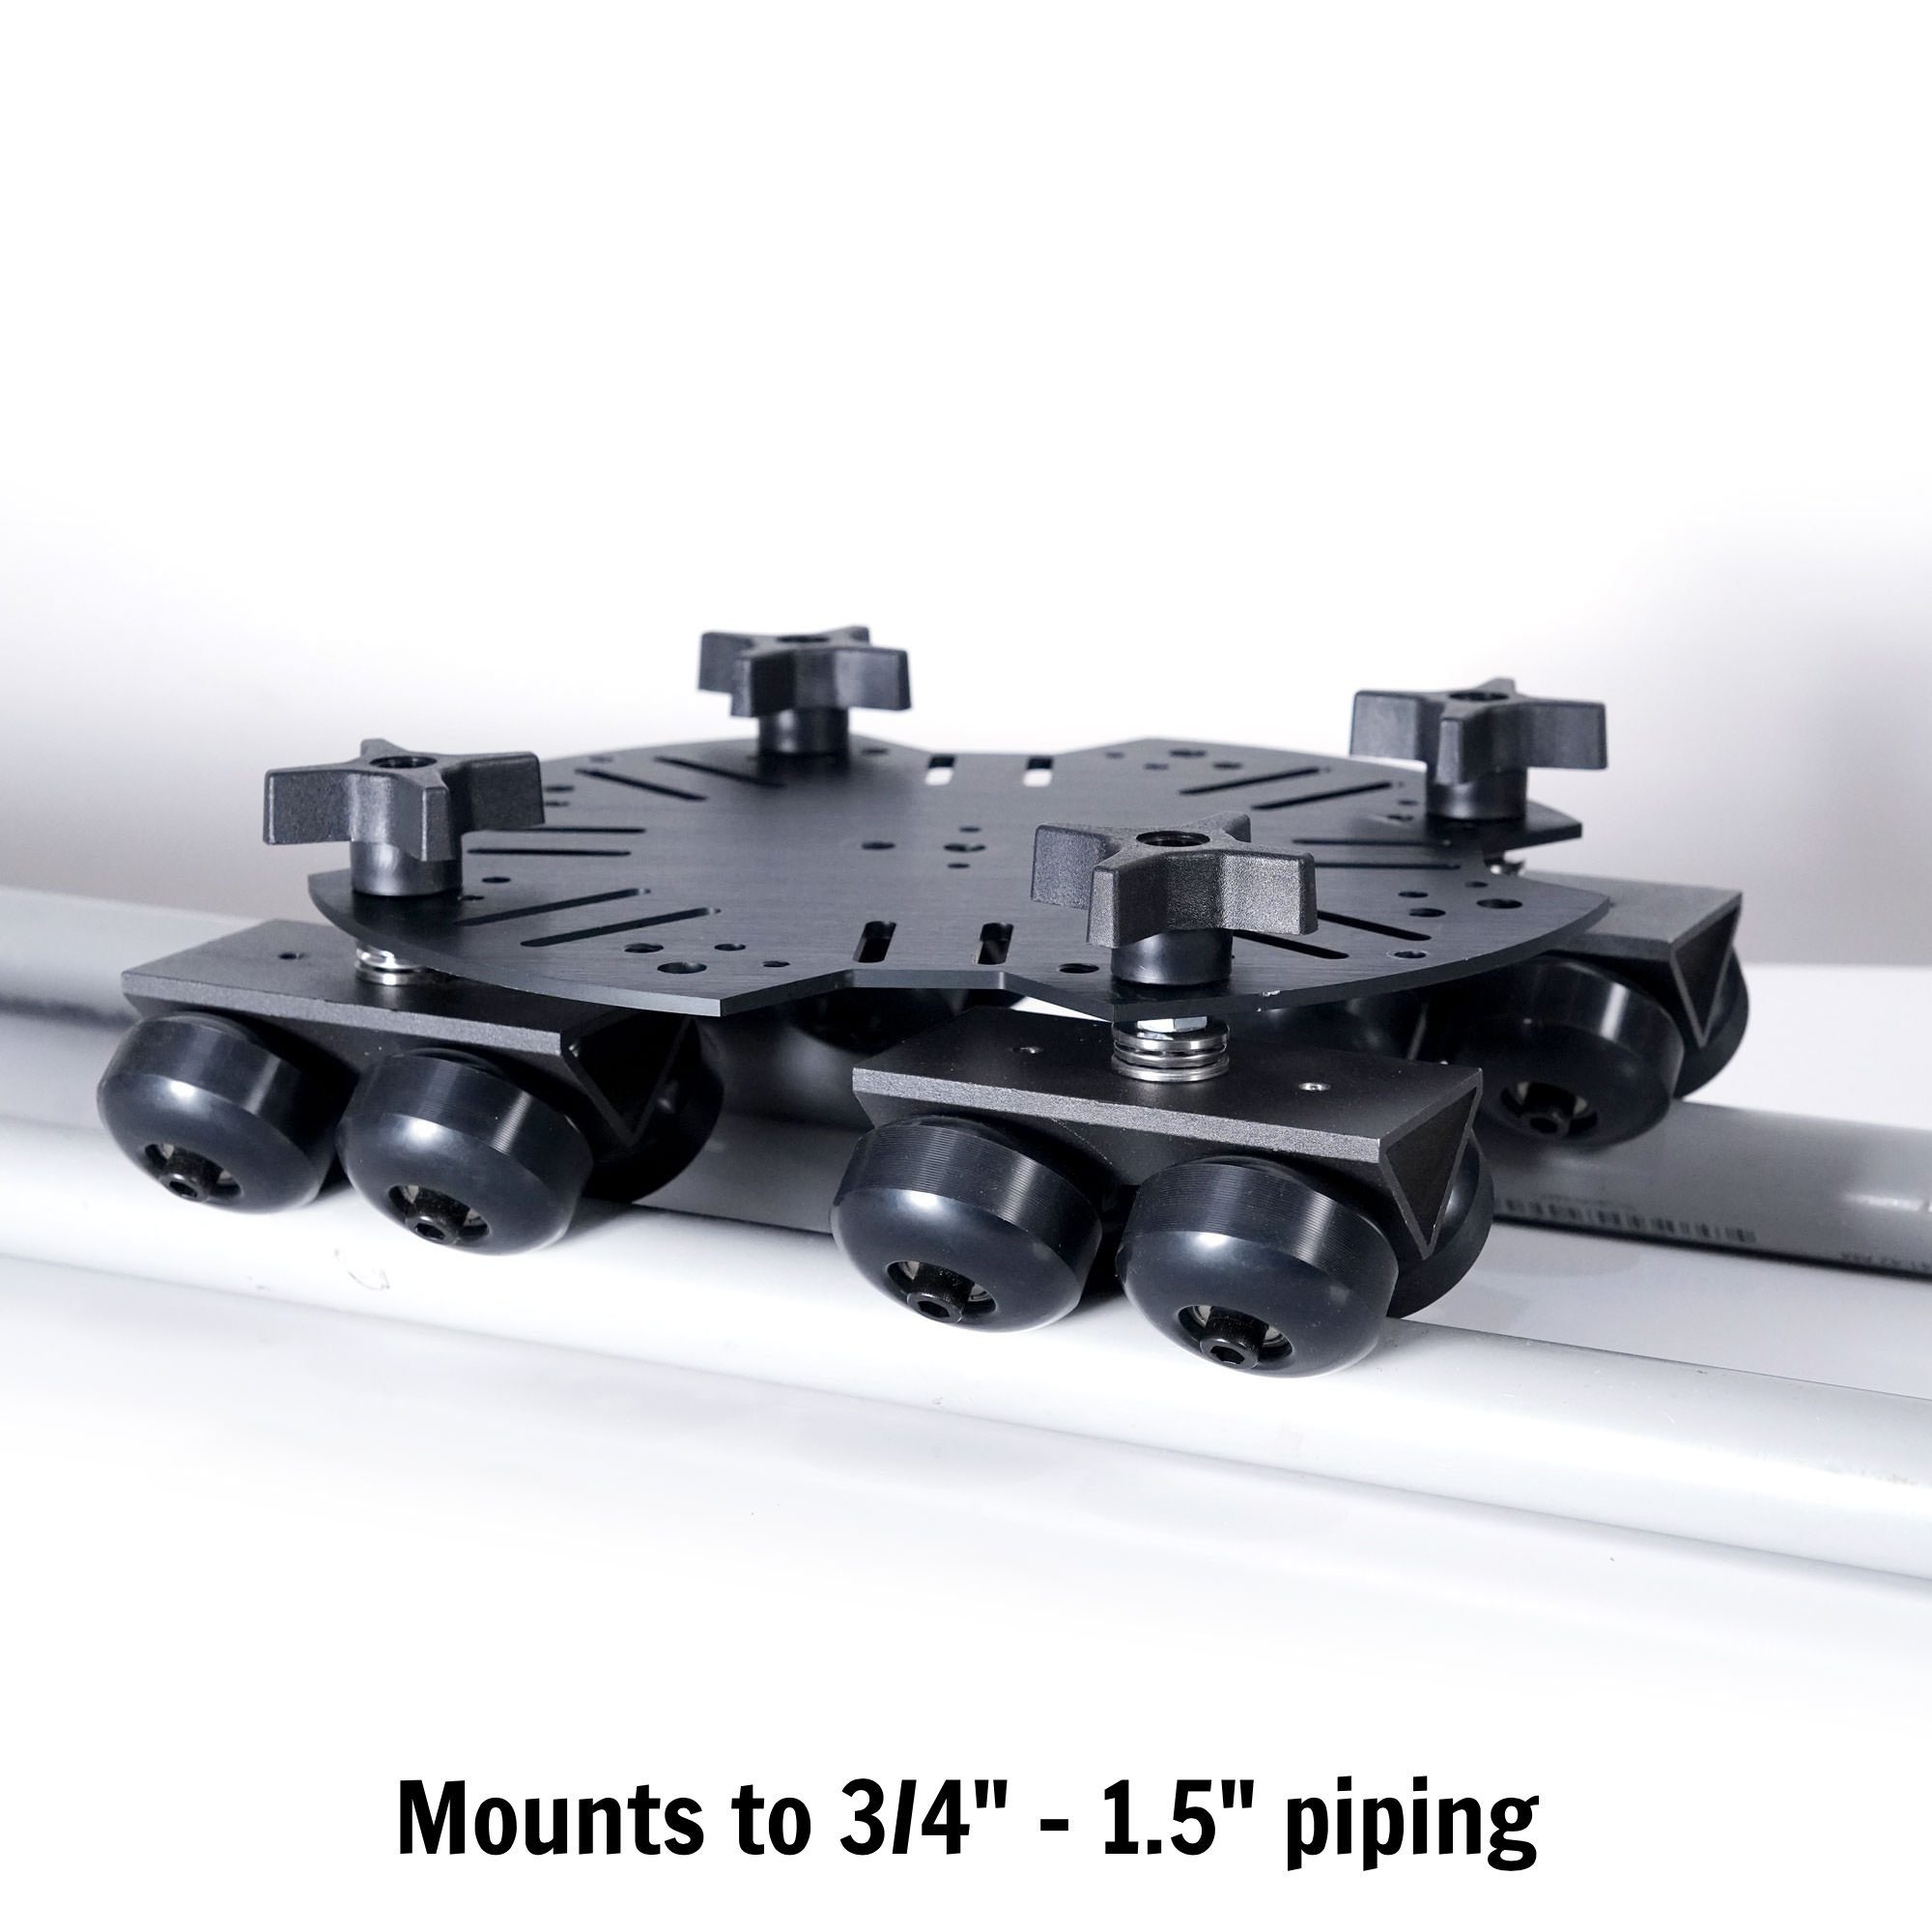 SolidTrax Universal Track Dolly DIY Wheels - Set of 4 - Works with Modus System - PRODUCTS